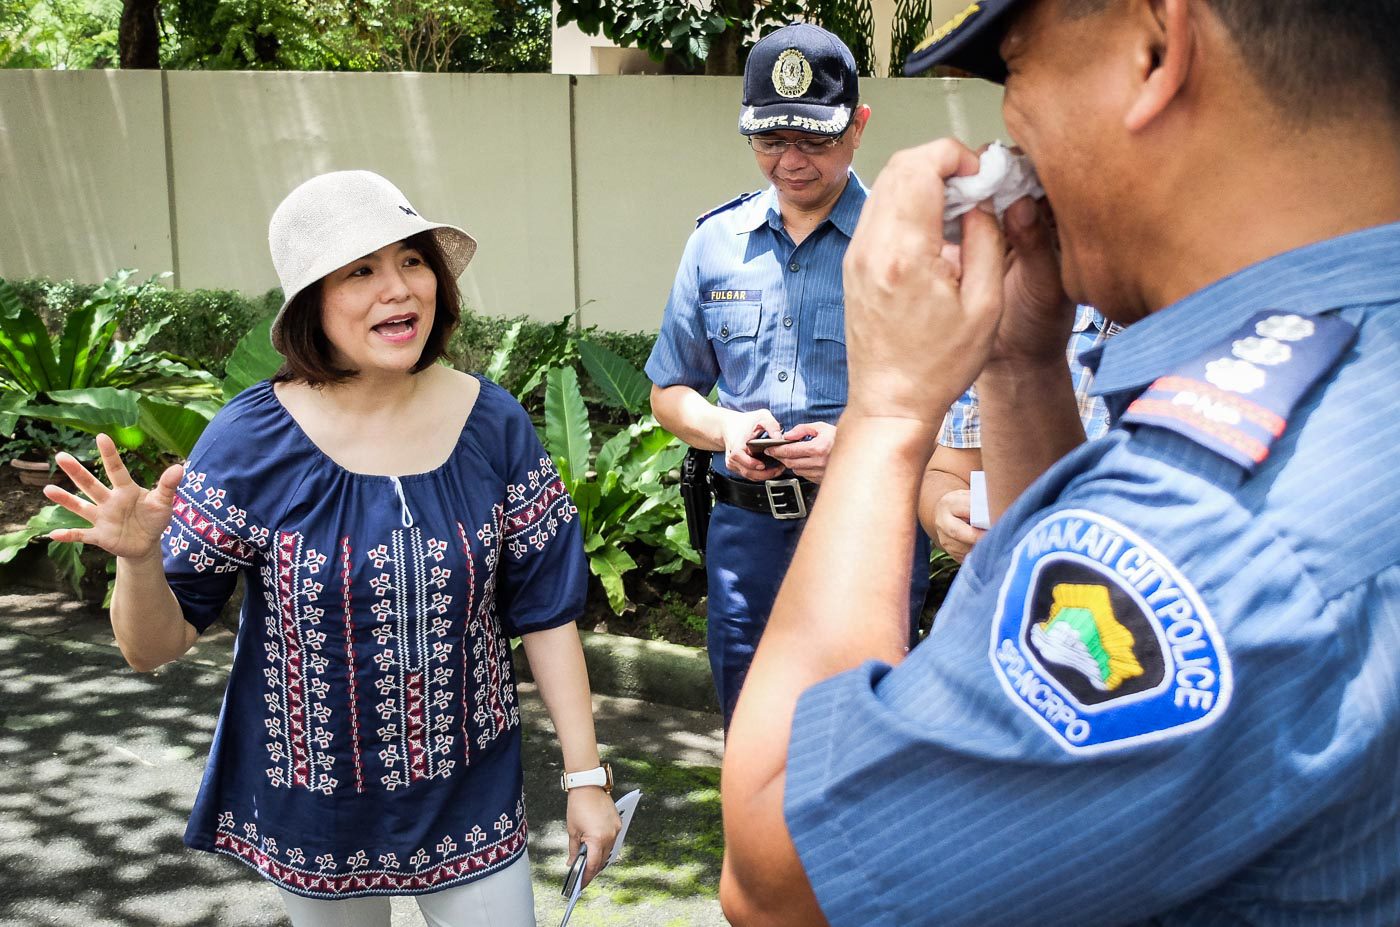 LIGHT BANTER. Forbes Park Barangay Captain Manotok talks to police during the "reinvigorated" Oplan TokHang in her barangay. Photo by LeAnne Jazul/Rappler 